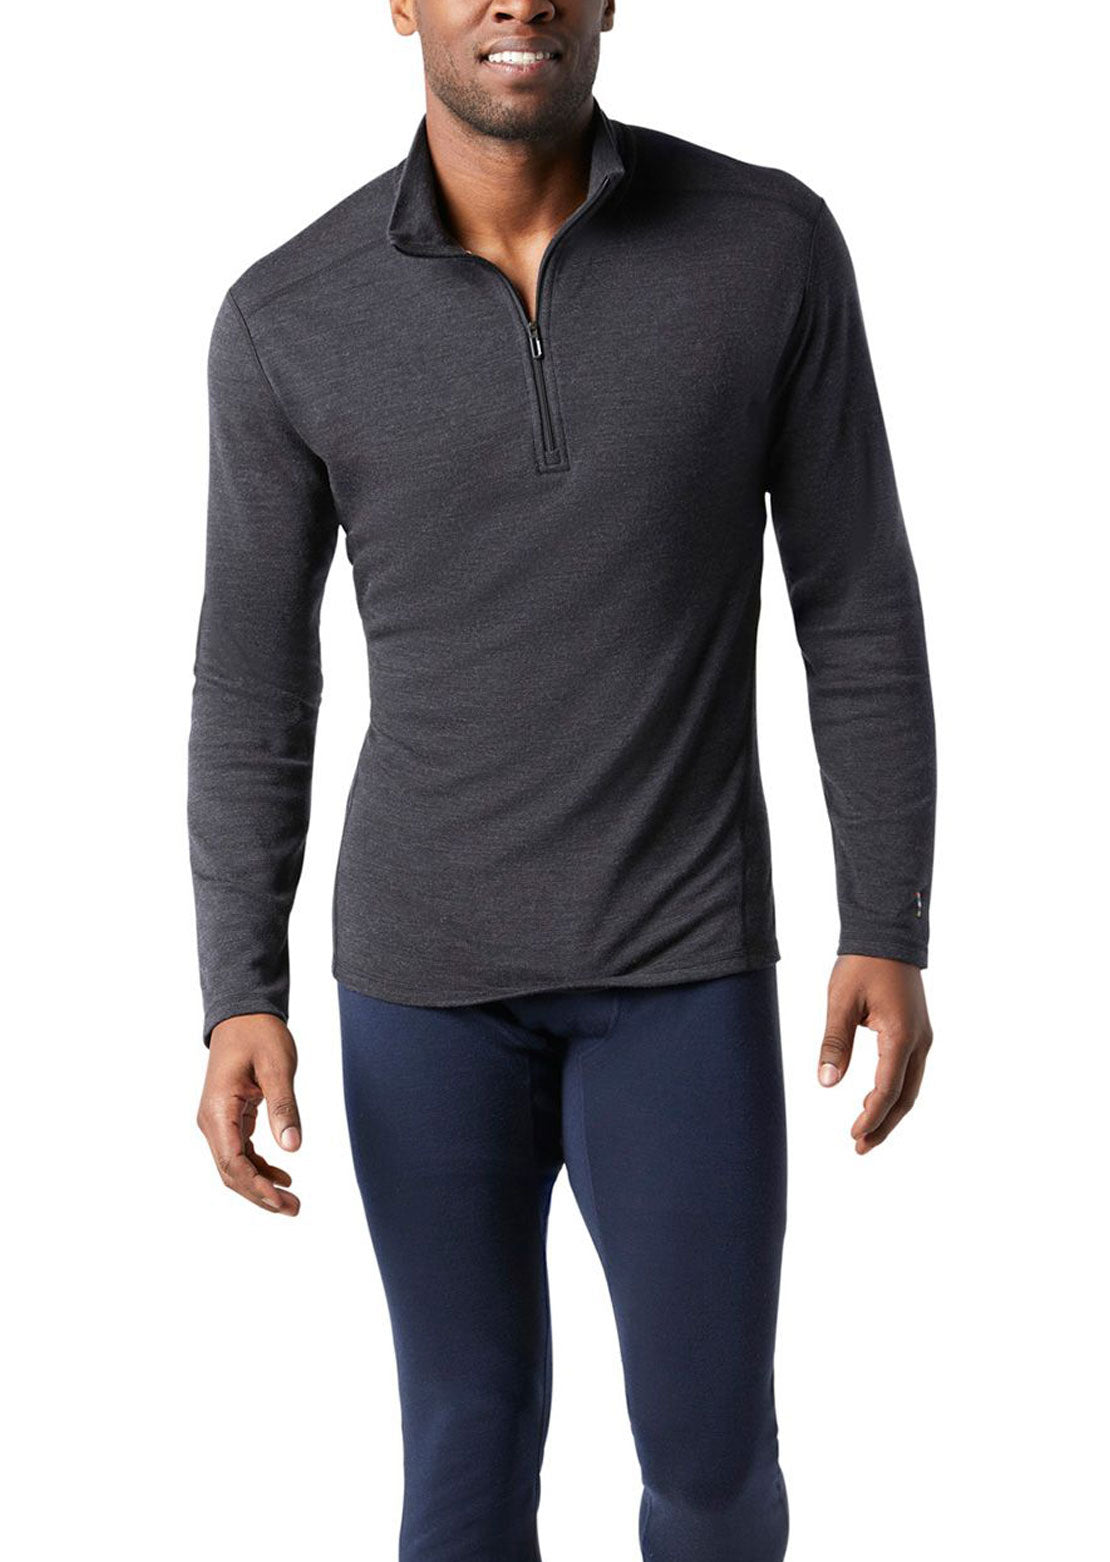 https://www.prfo.com/cdn/shop/products/smartwool-mens-classic-thermal-merino-250-1-4-zip-base-layer-top-charcoal-heather-front_1200x.jpg?v=1664632703